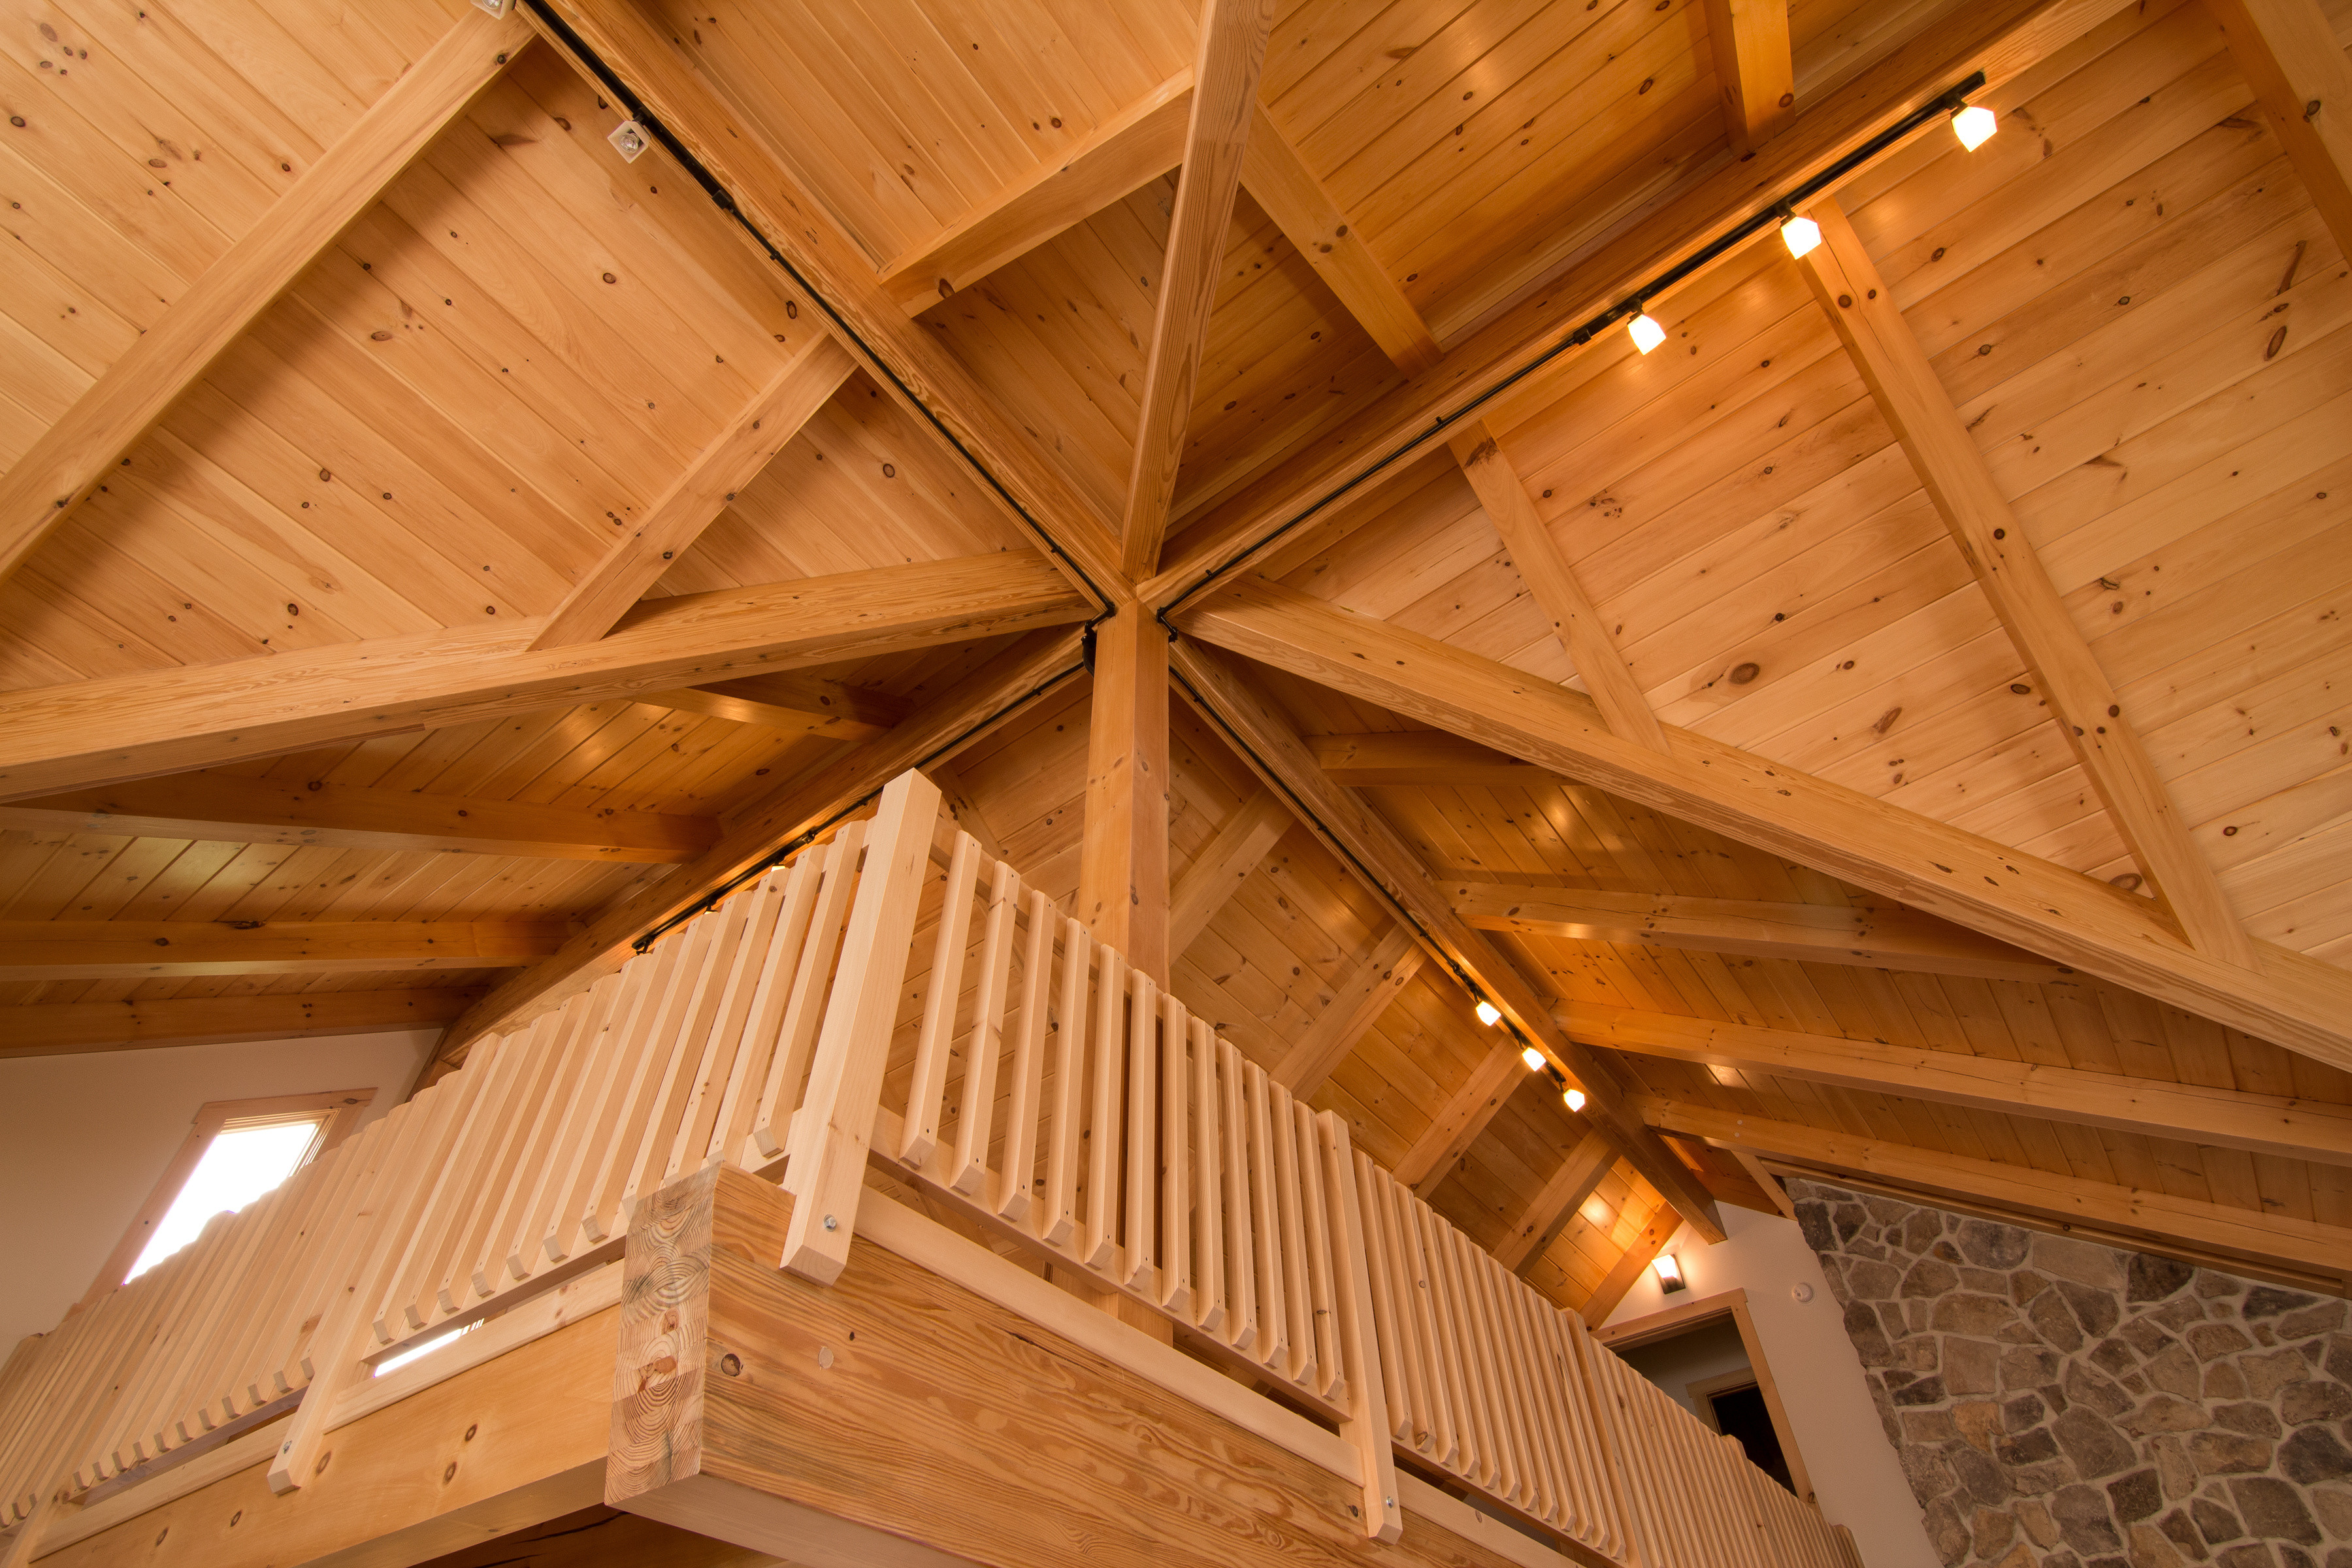 Introducing our NEW Custom Timber Frame Home Product Line